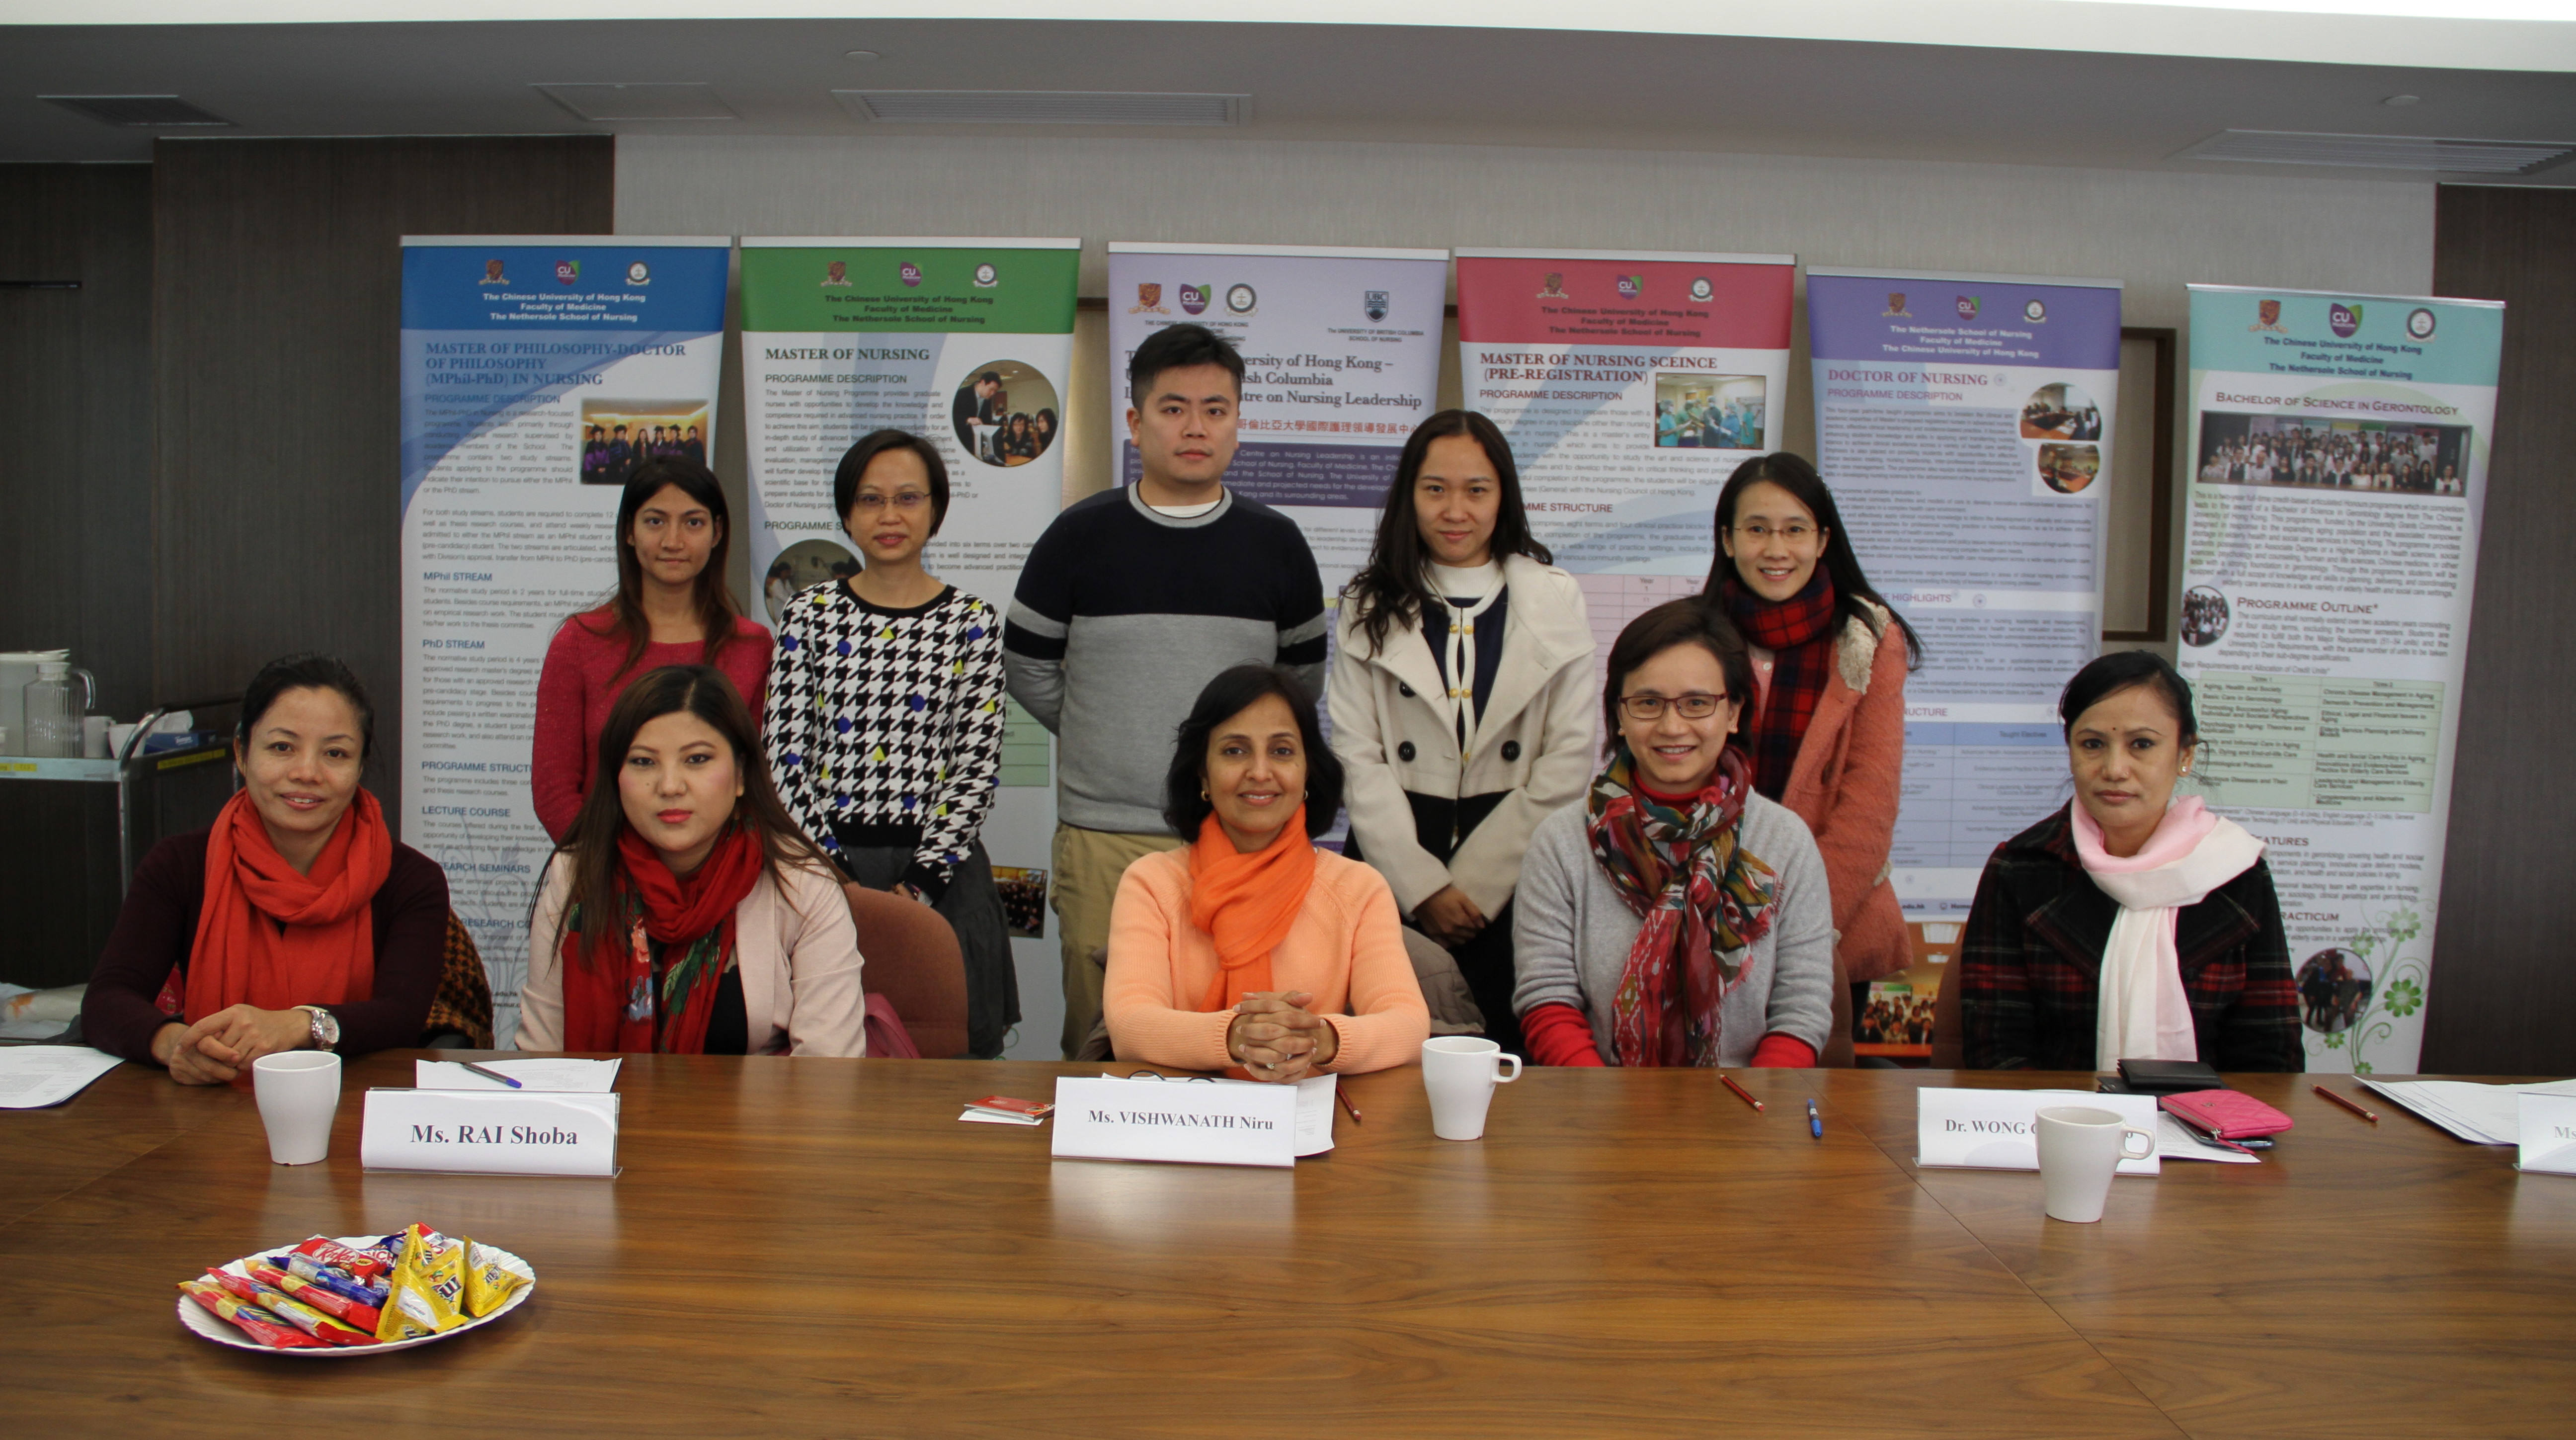 Members of an advisory panel formed during the preparation for the development of the multimedia educational programme. Meetings were held between the members to discuss how to make the programme more interesting, informative and culturally acceptable to South Asian women.